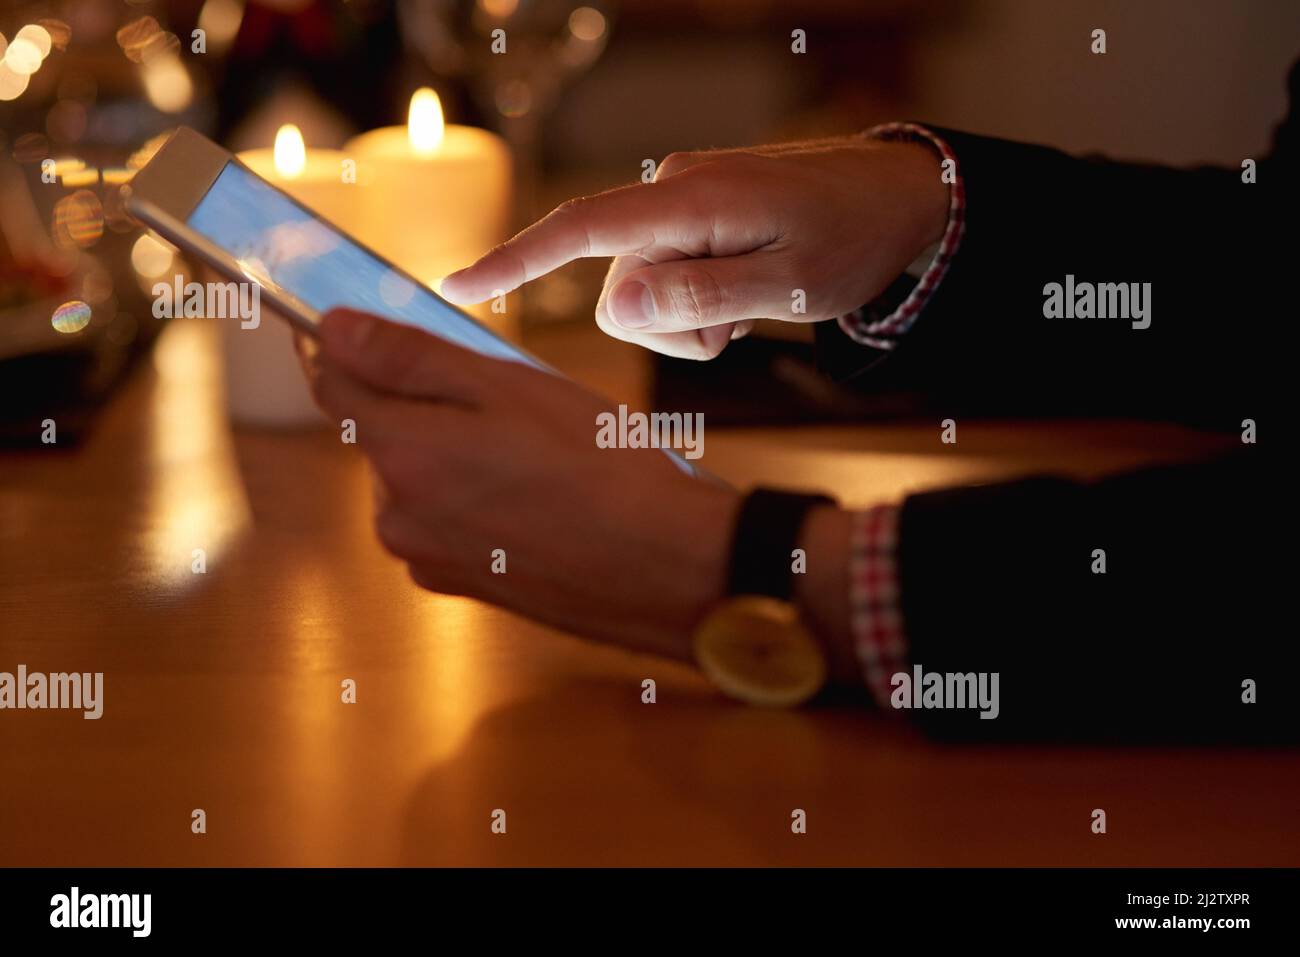 Day and night connections. Shot of an unrecognizable businessman using a digital tablet. Stock Photo